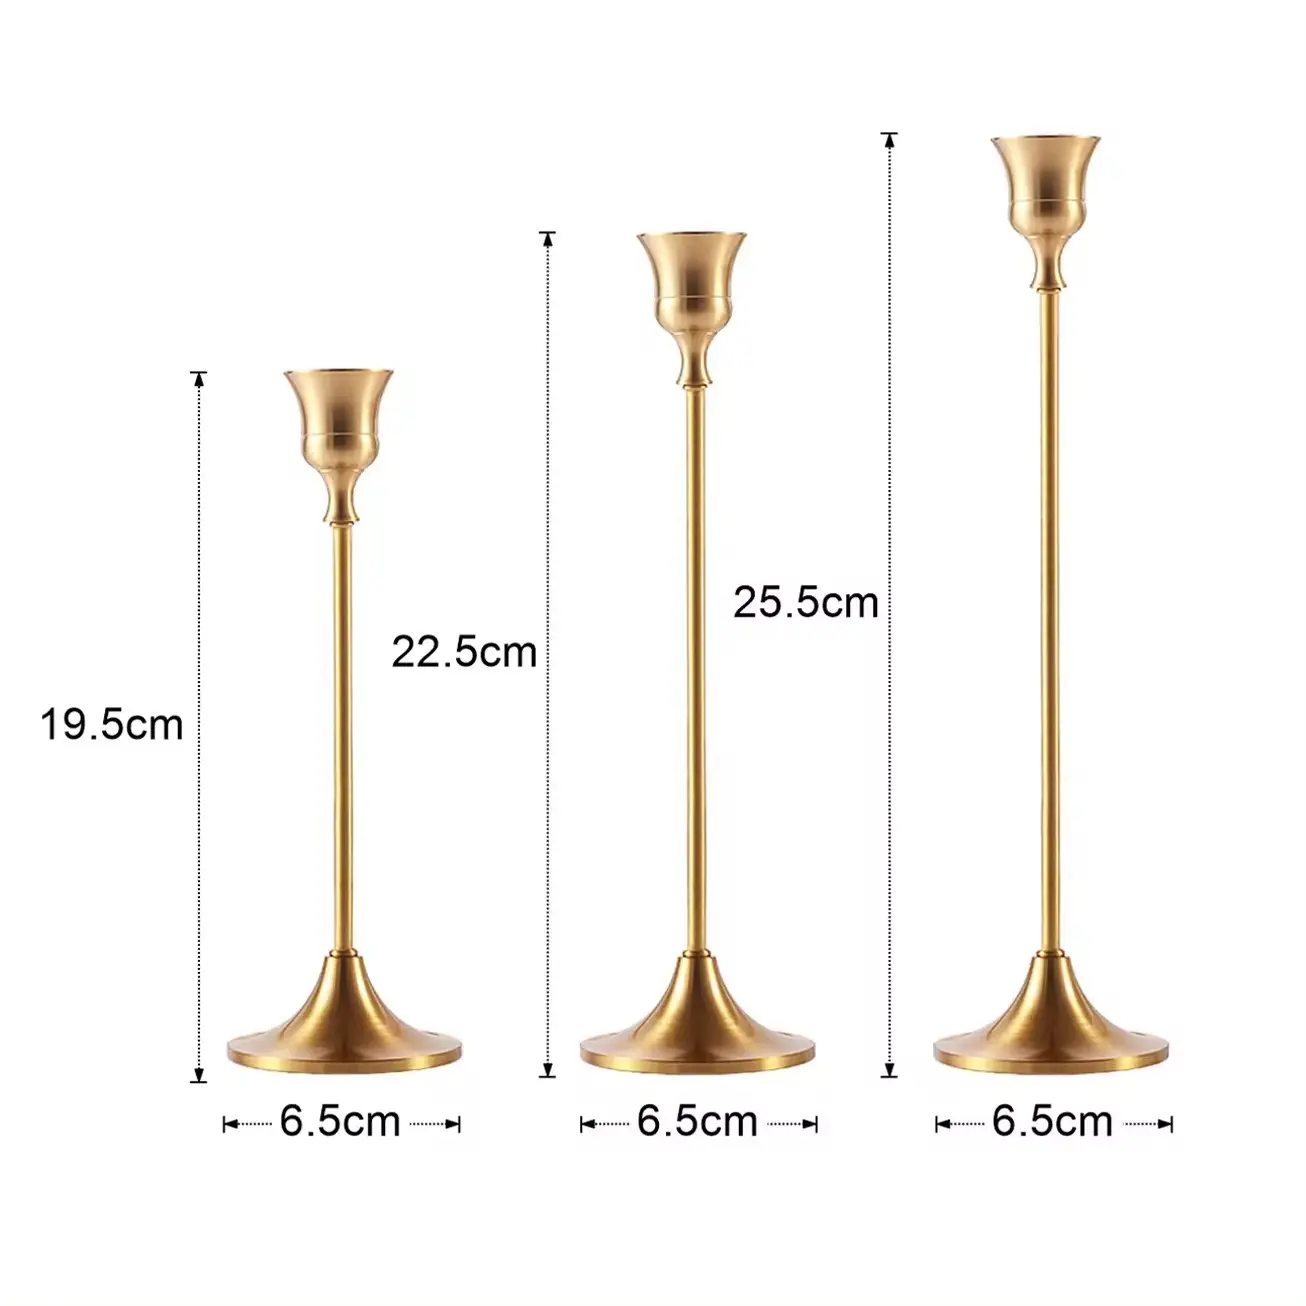 Top Selling Small Metal Candle Holder Stand Sleek Design Unique Handmade Brass Finishing Decorative Lighting for Home and Hotel